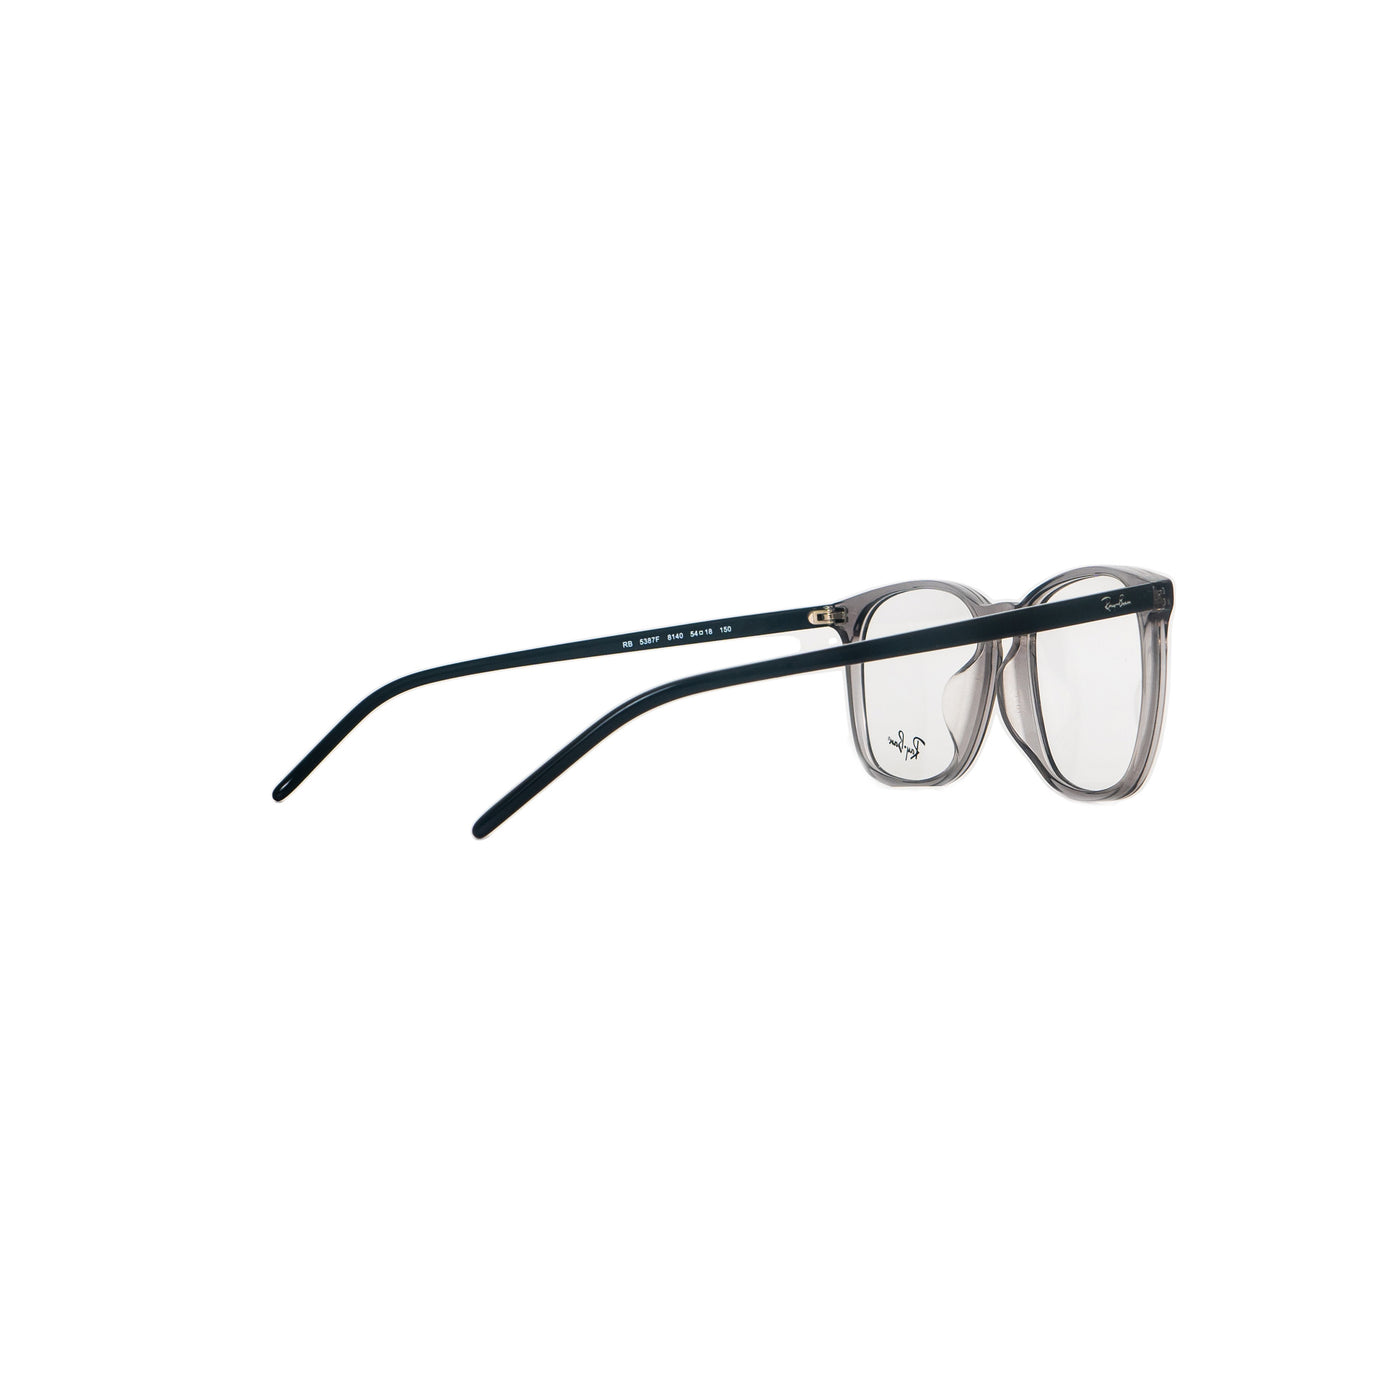 Ray-Ban Eyeglasses | RB5387F814054 - Vision Express Optical Philippines